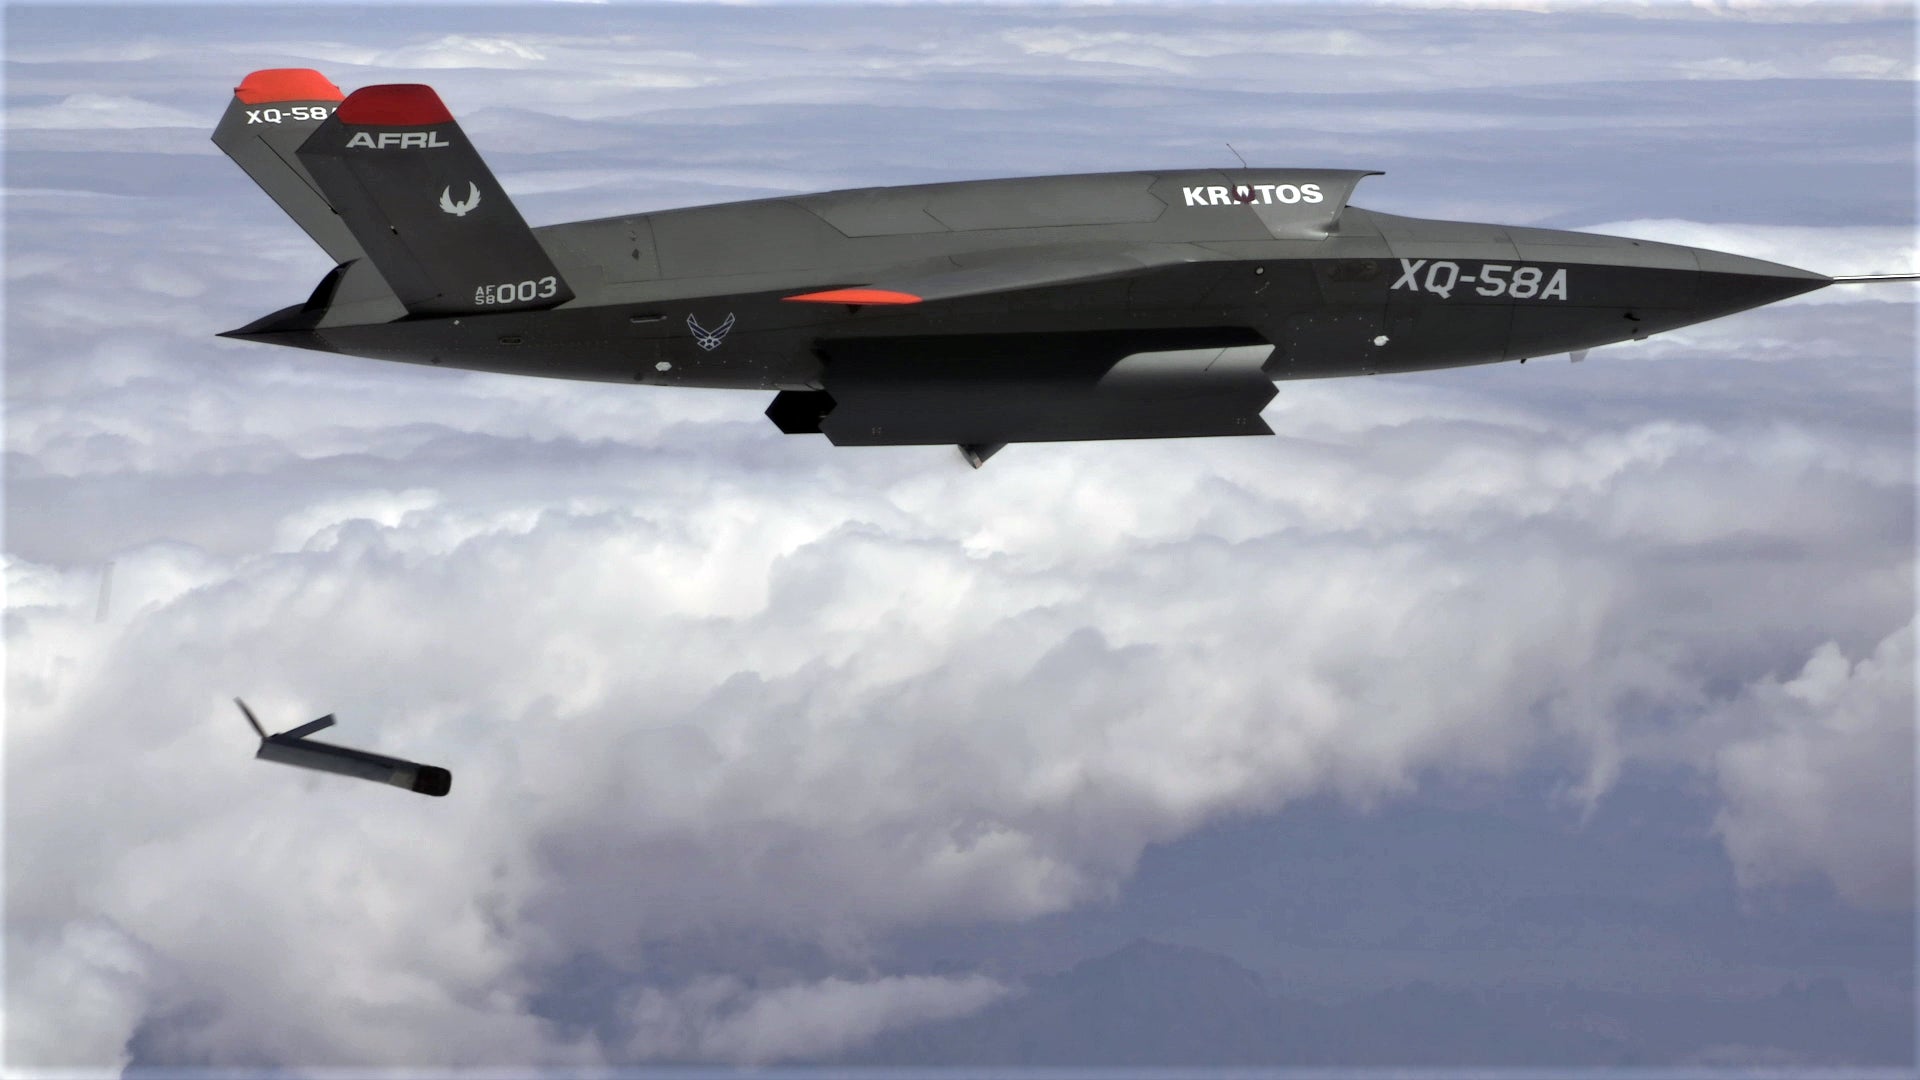 The XQ-58A Valkyrie demonstrates the separation of the ALTIUS-600 small unmanned aircraft system in a test at the U.S. Army Yuma Proving Ground test range, Ariz., March 26, 2021. The test was the first time the weapons bay doors have been opened in flight. (U.S. Air Force courtesy photo)